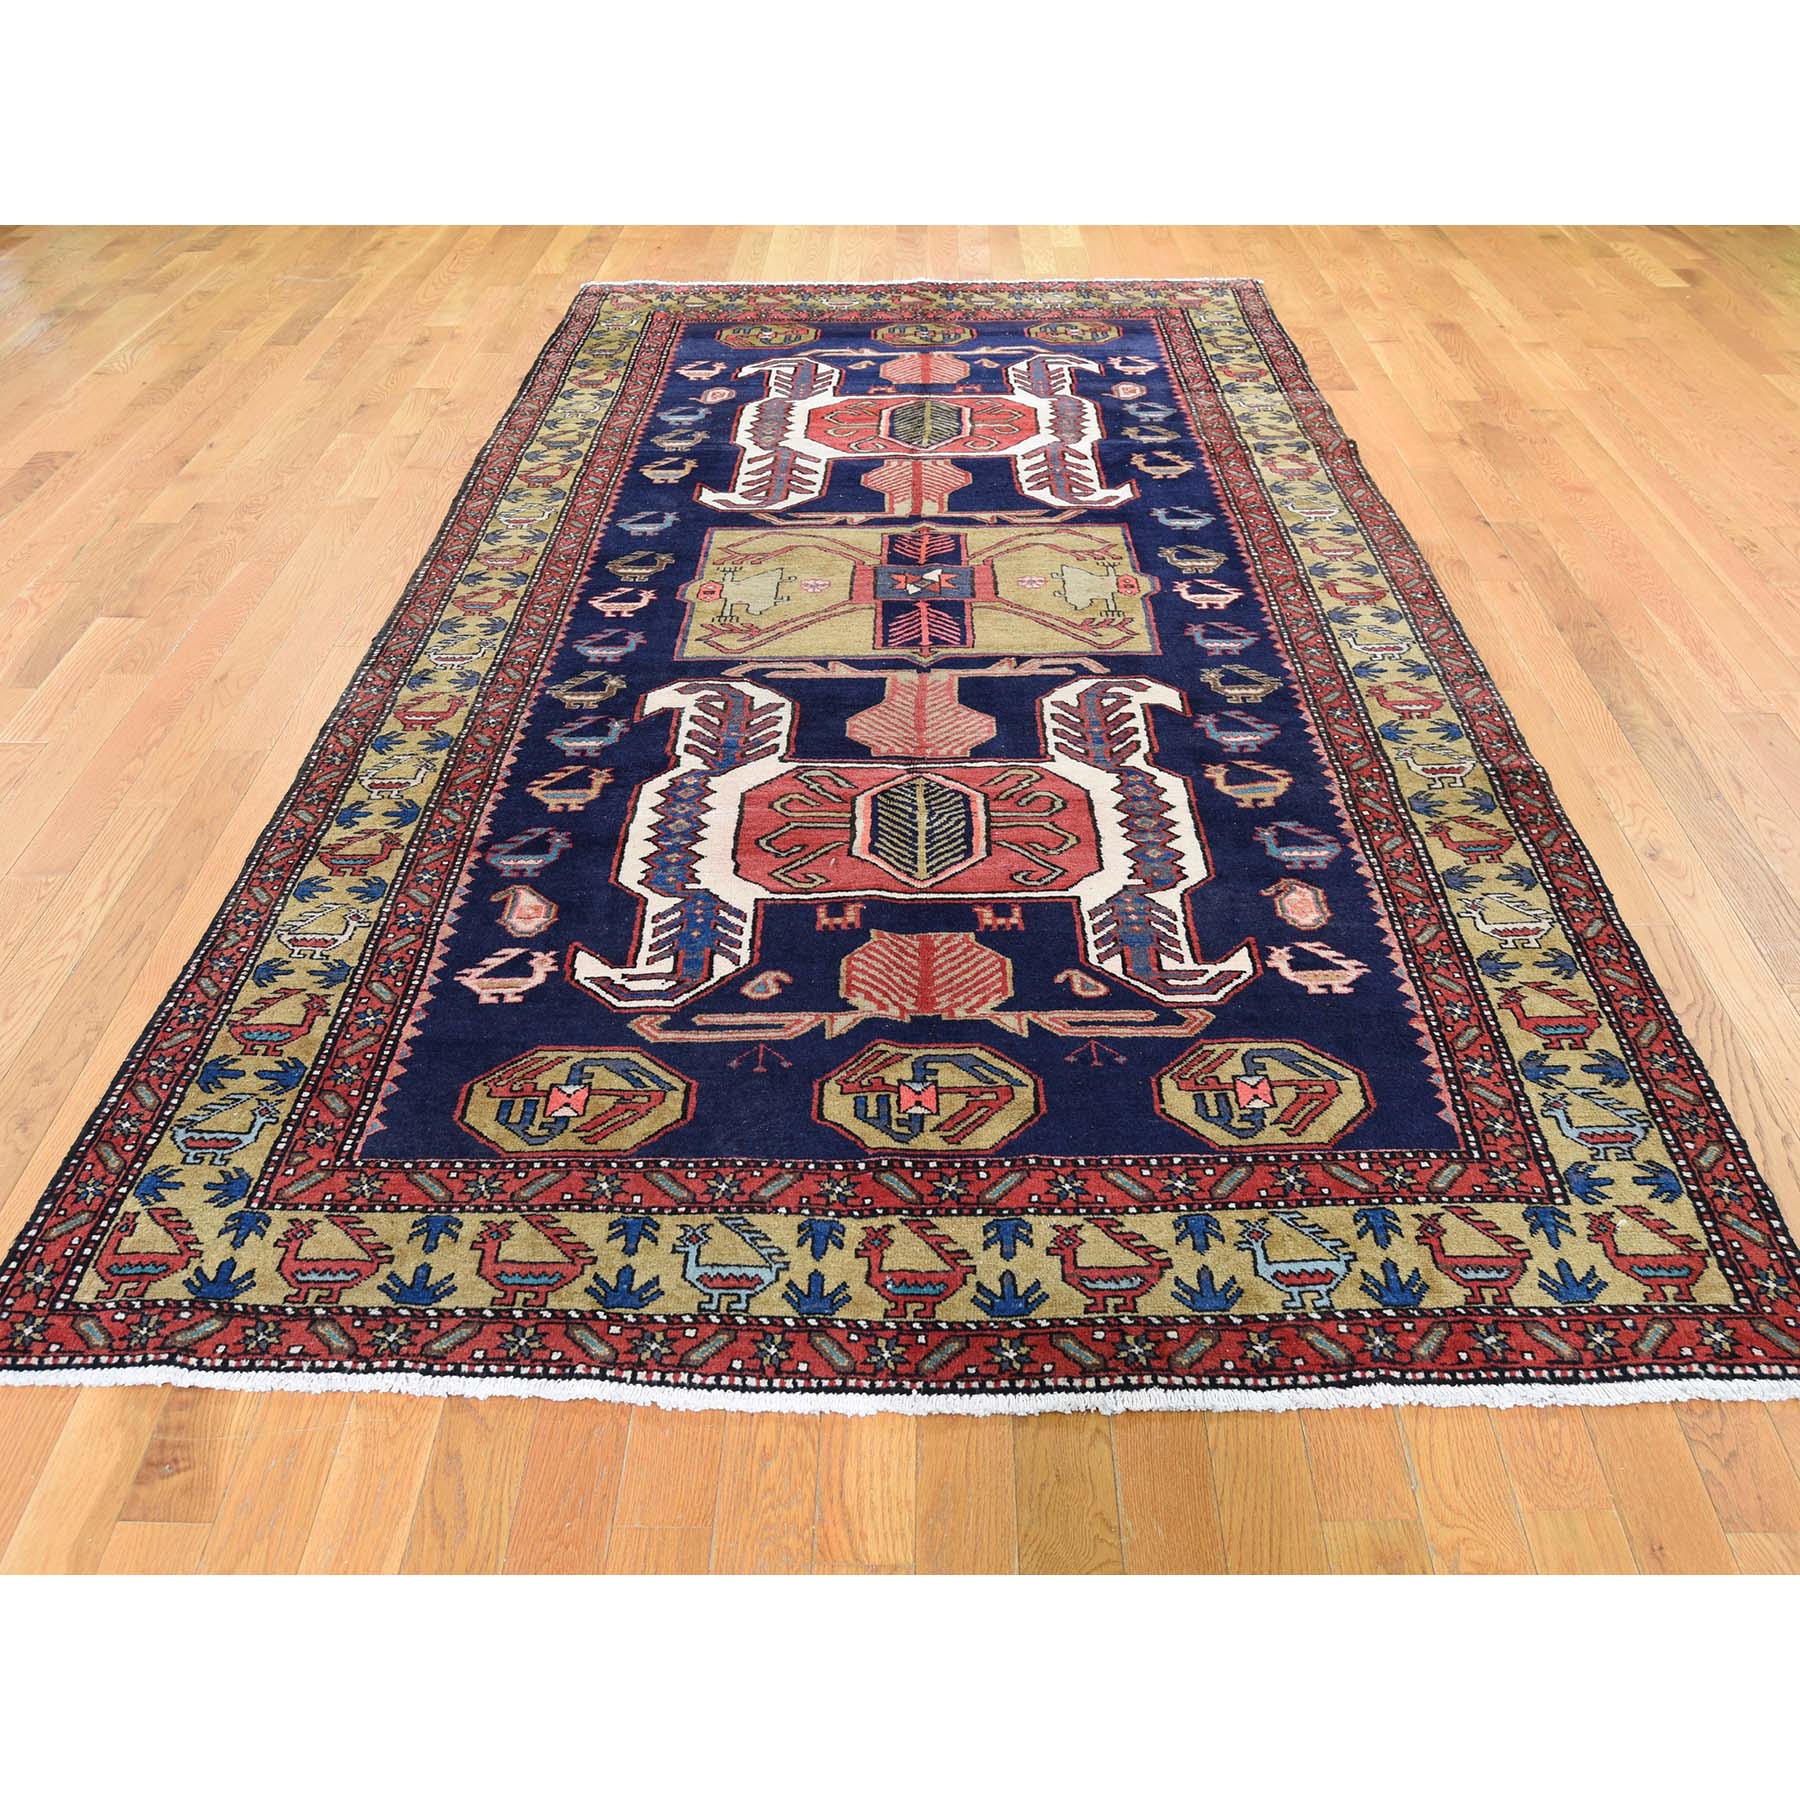 5-7 x11- Vintage North West Persian With Ancient Peacocks Figure Motifs  Wide Gallery Runner Hand-Knotted Oriental Rug 